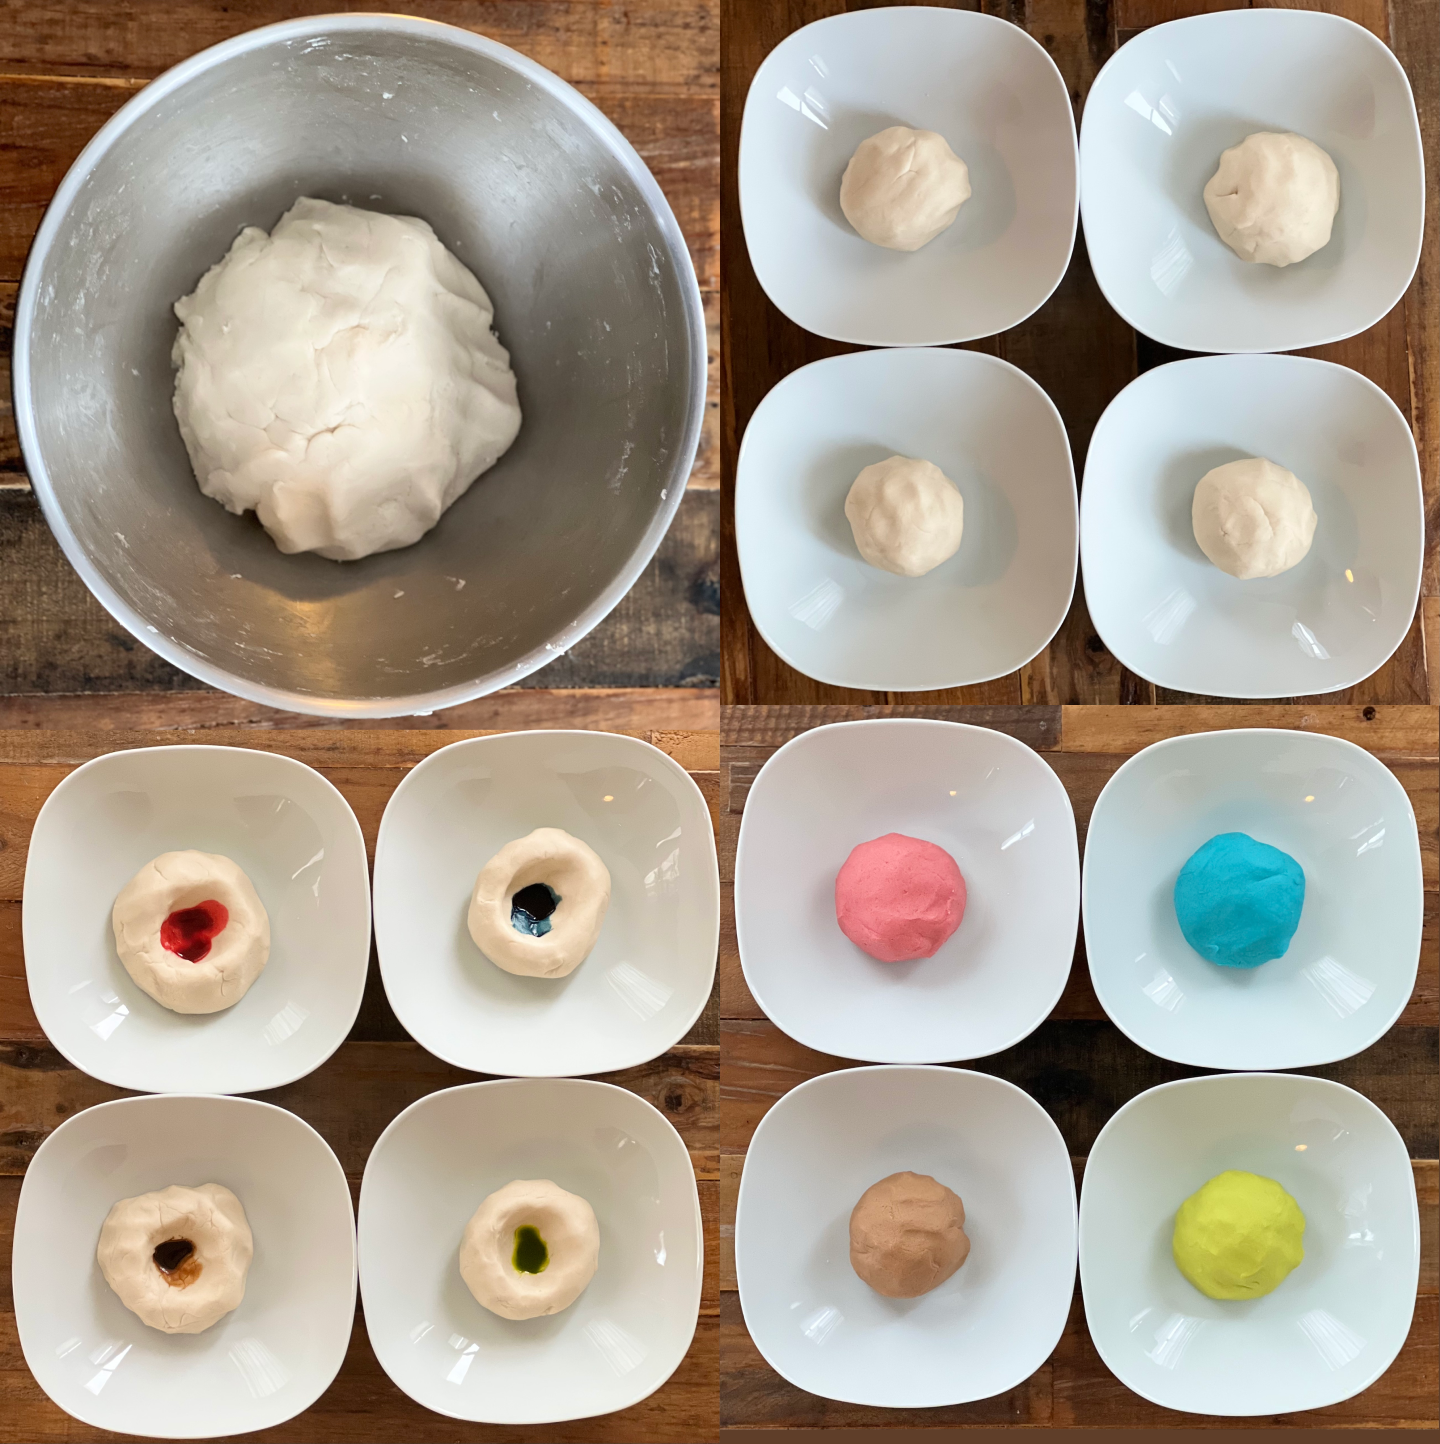 Images of dough being made and turned into colorful play dough with colors going clockwise from top left: red, blue, brown, and green